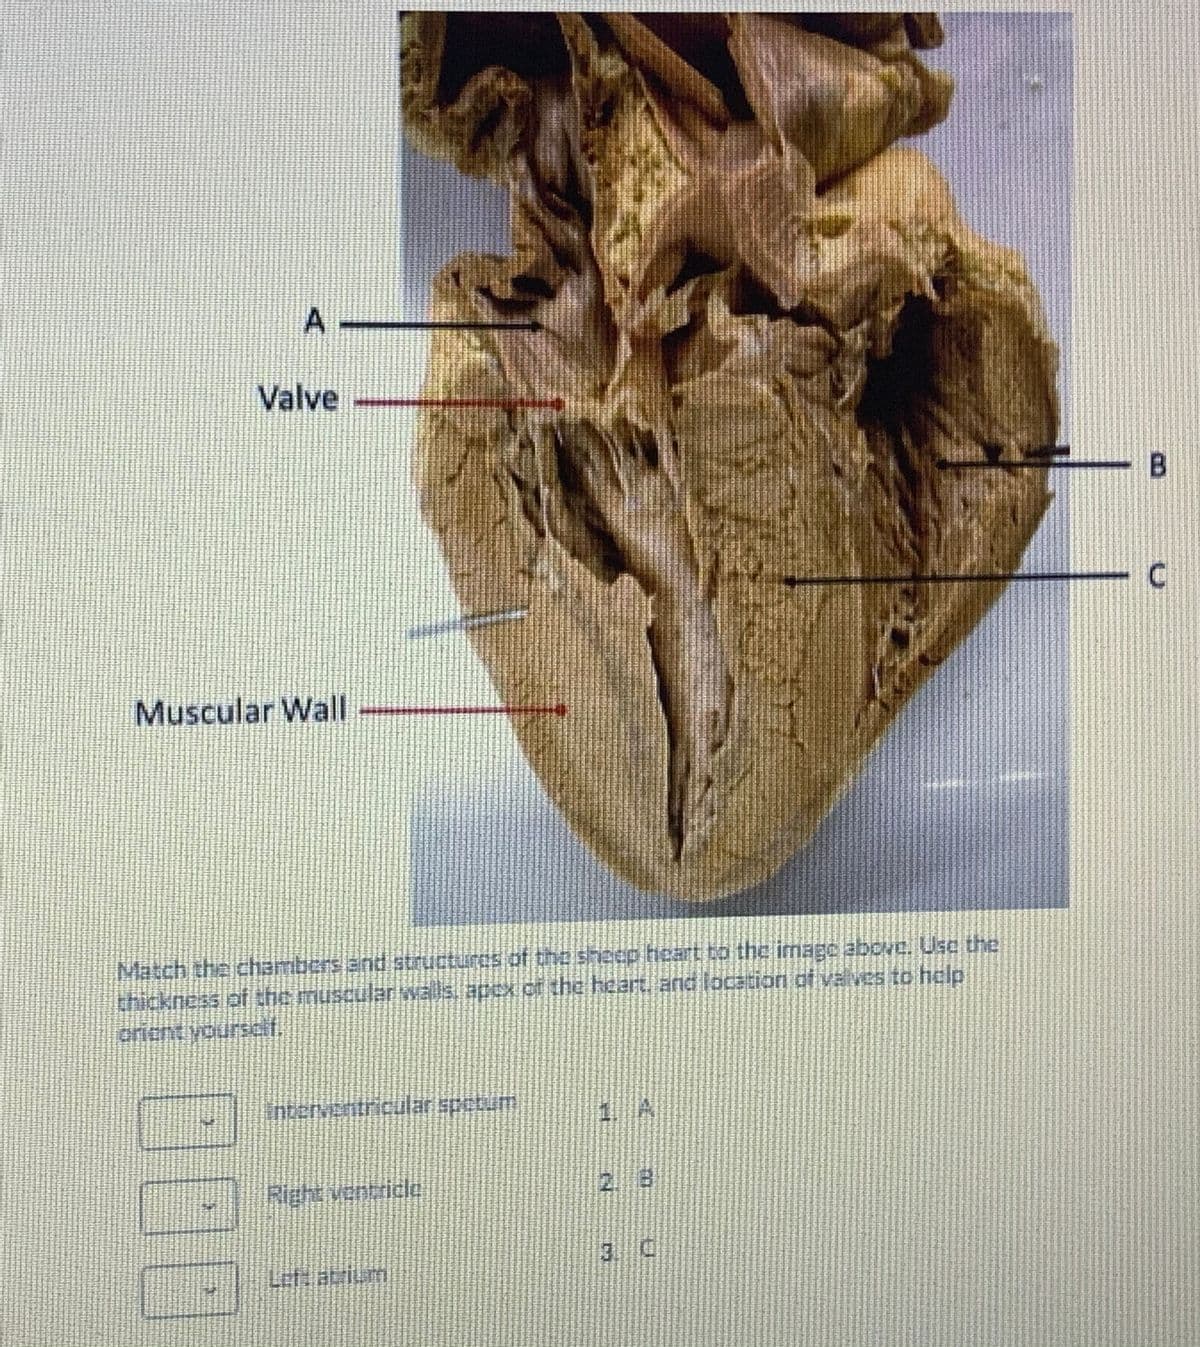 Valve
Muscular Wall
Mätch the chamibers and structures of the sheep heart to the image abovc. Use the
thickness pf the muscular walls. apEx Of the heart, and location of valves to help
crient yourscf.
interventricuülar spctum
Right vencricle
2 8
3. C
